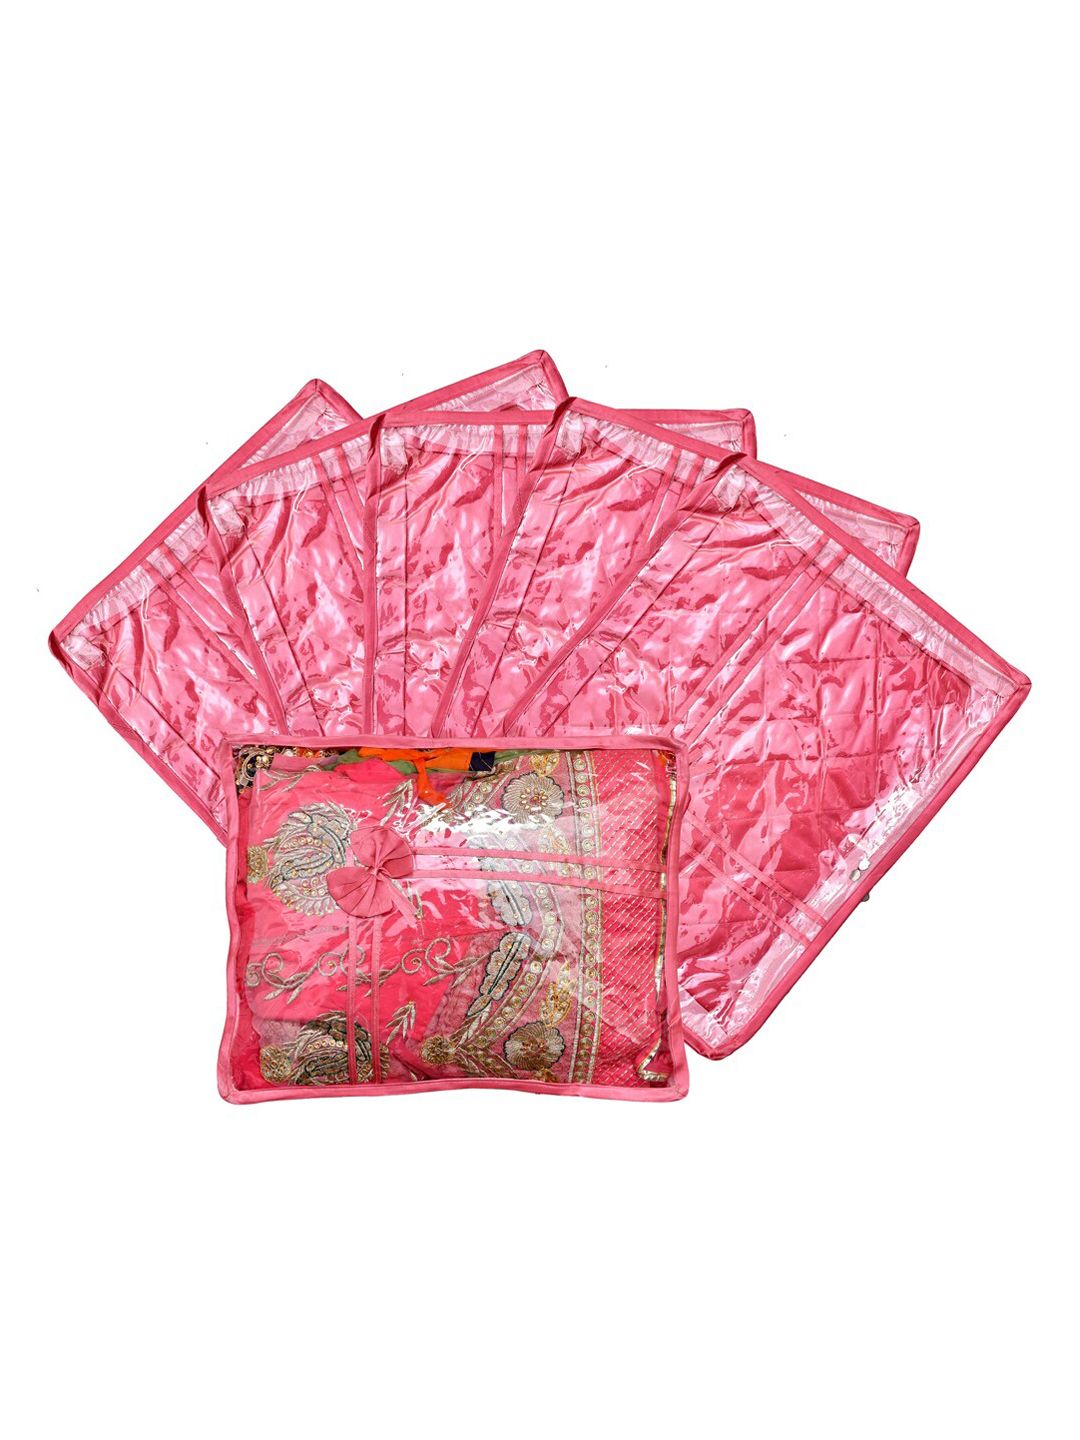 Kuber Industries Set Of 6 Pink Solid Single Packing Saree Cover Organizer Price in India